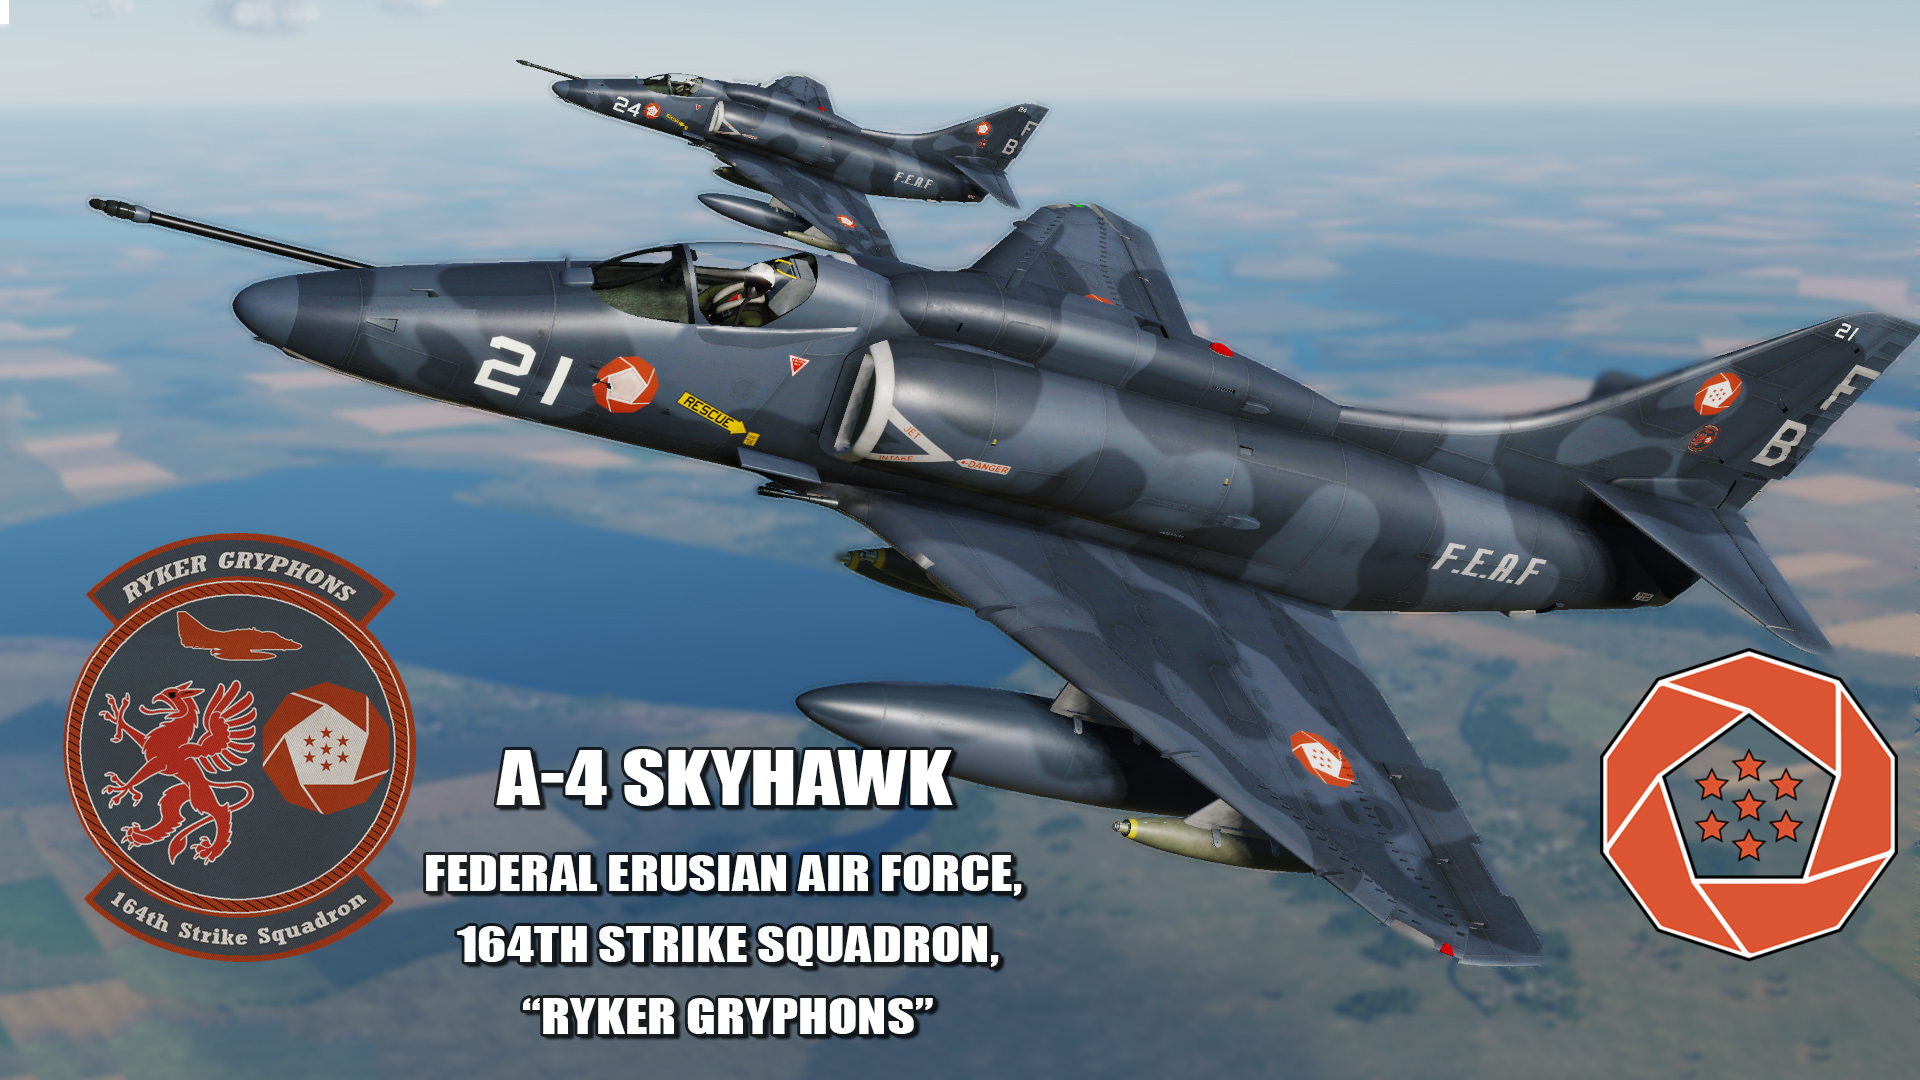 Ace Combat - Federal Erusian Air Force 164th Strike Squadron "Ryker Gryphons" A-4 Skyhawk